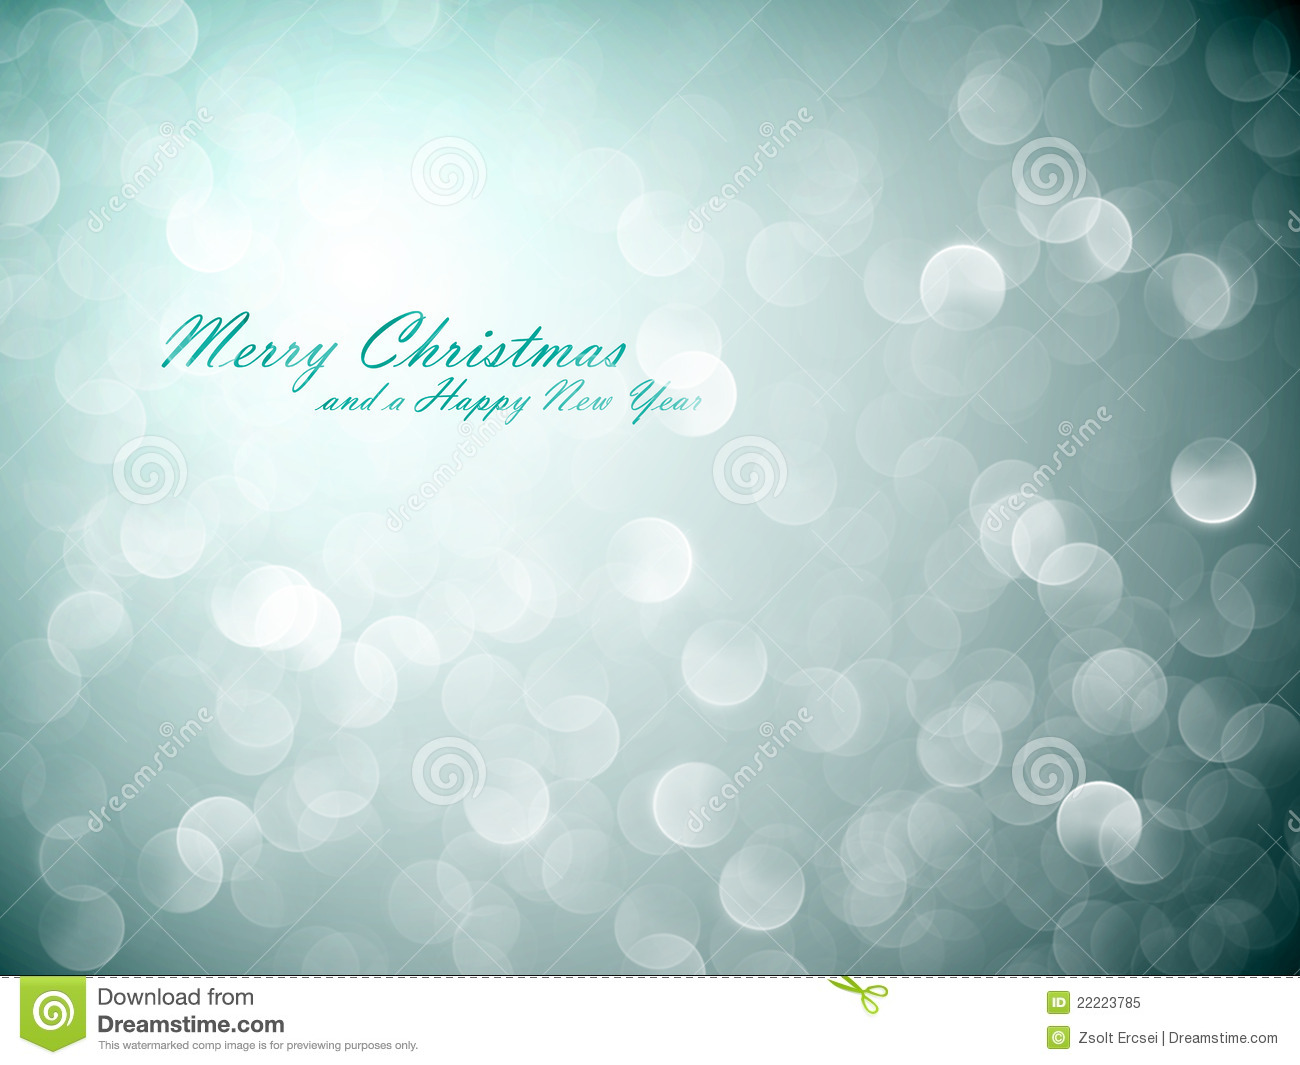 Flickering Lights   Christmas Background   Eps10 Vector With Separate